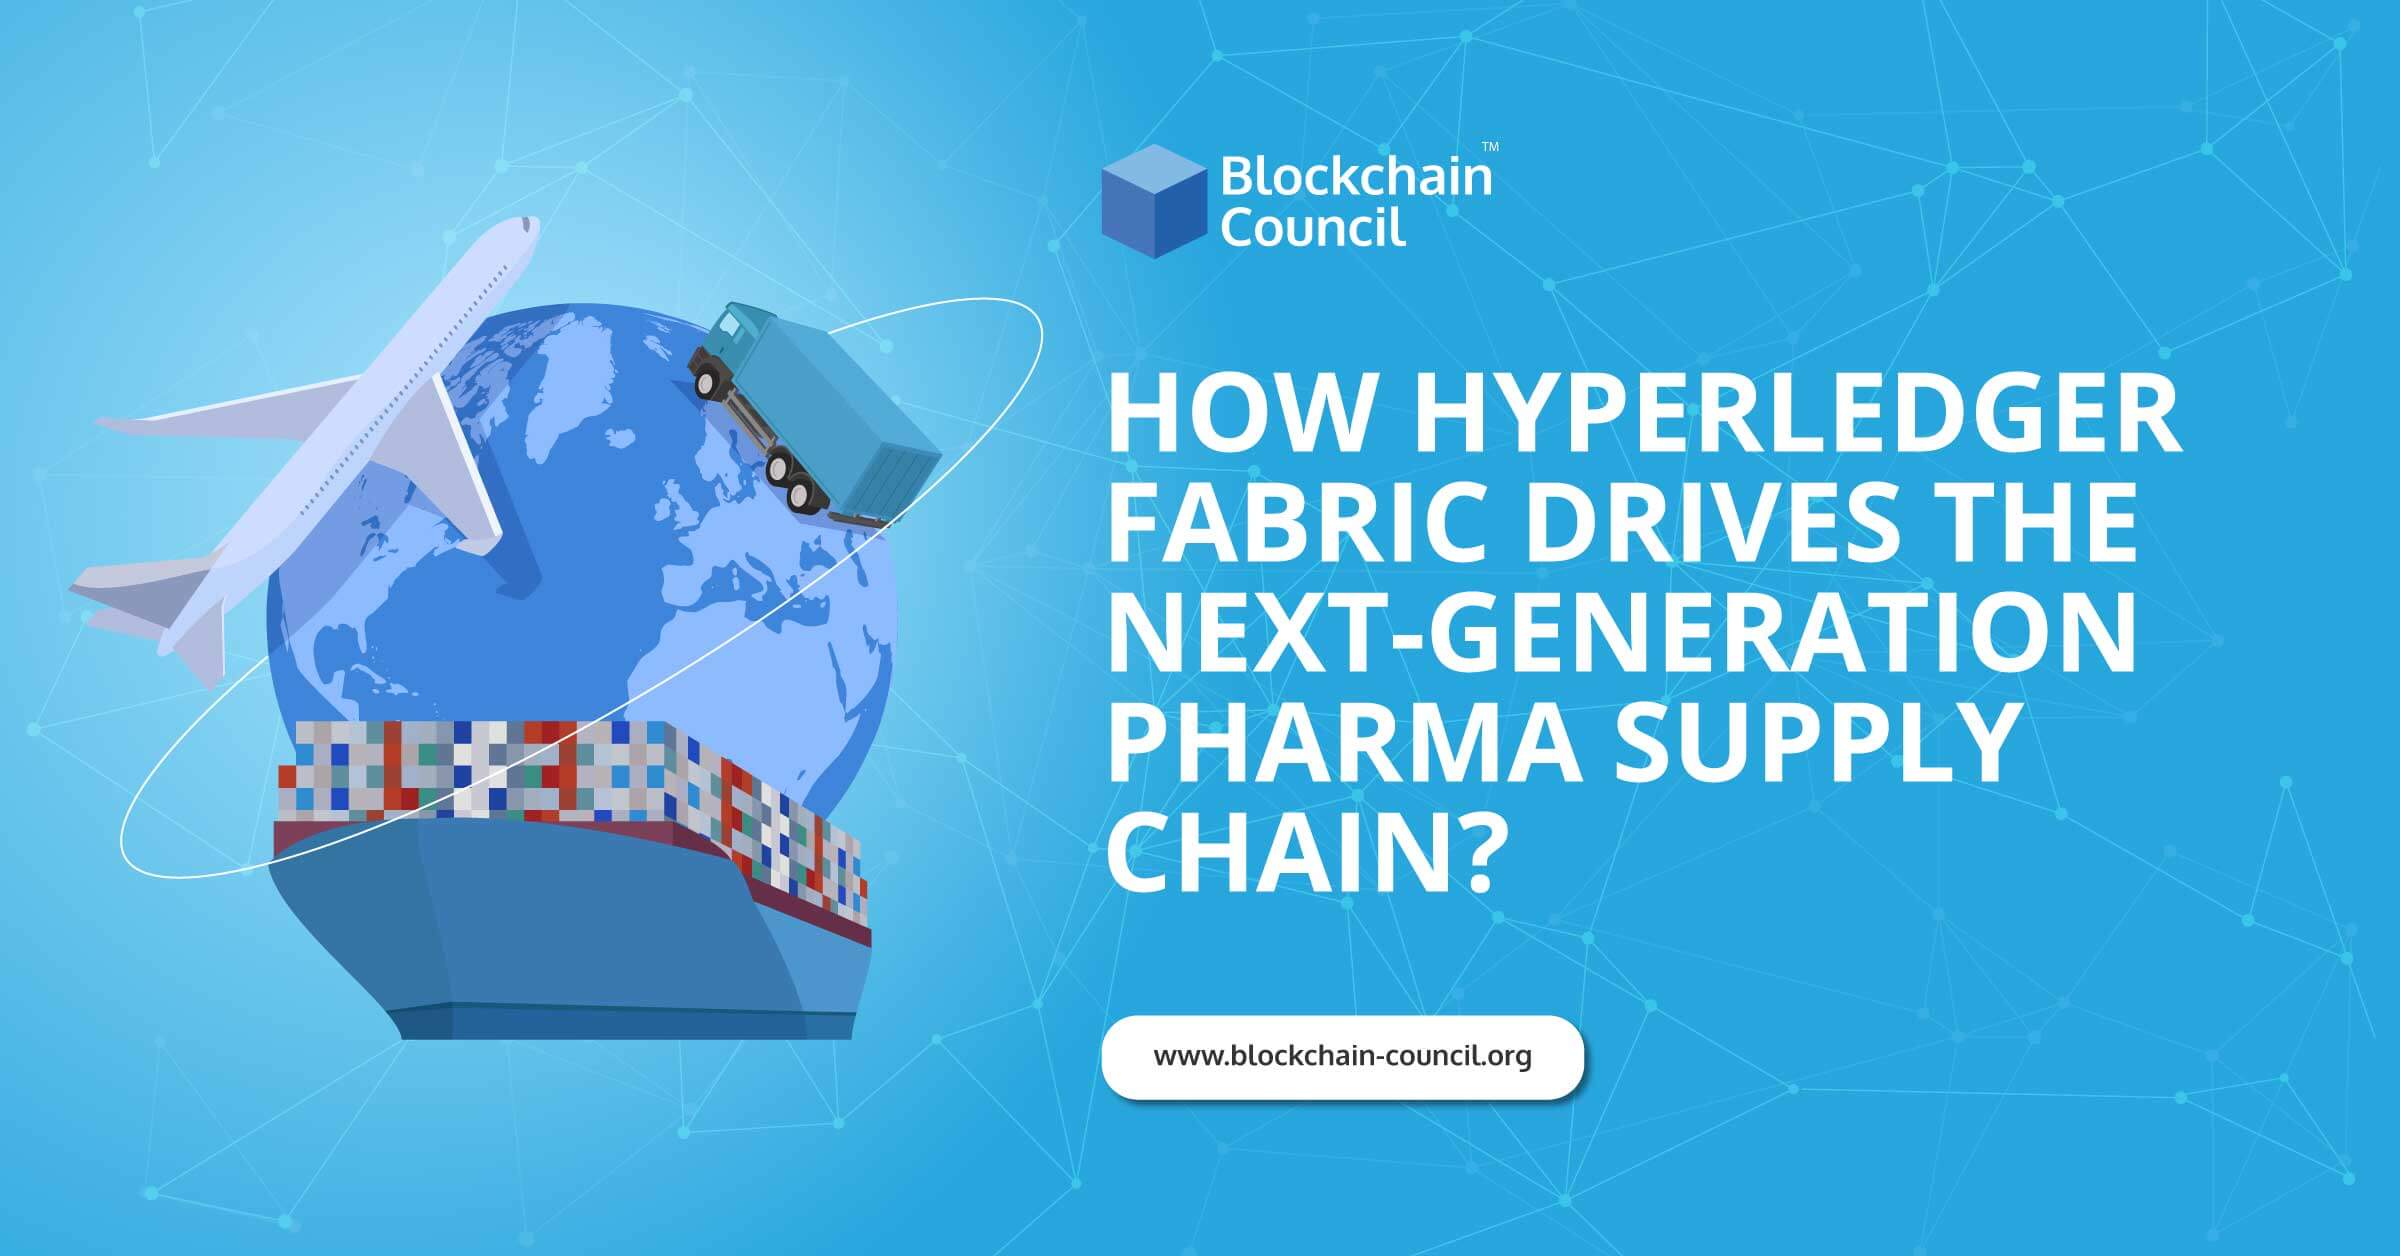 How-Hyperledger-Fabric-drives-the-next-generation-pharma-supply-chain